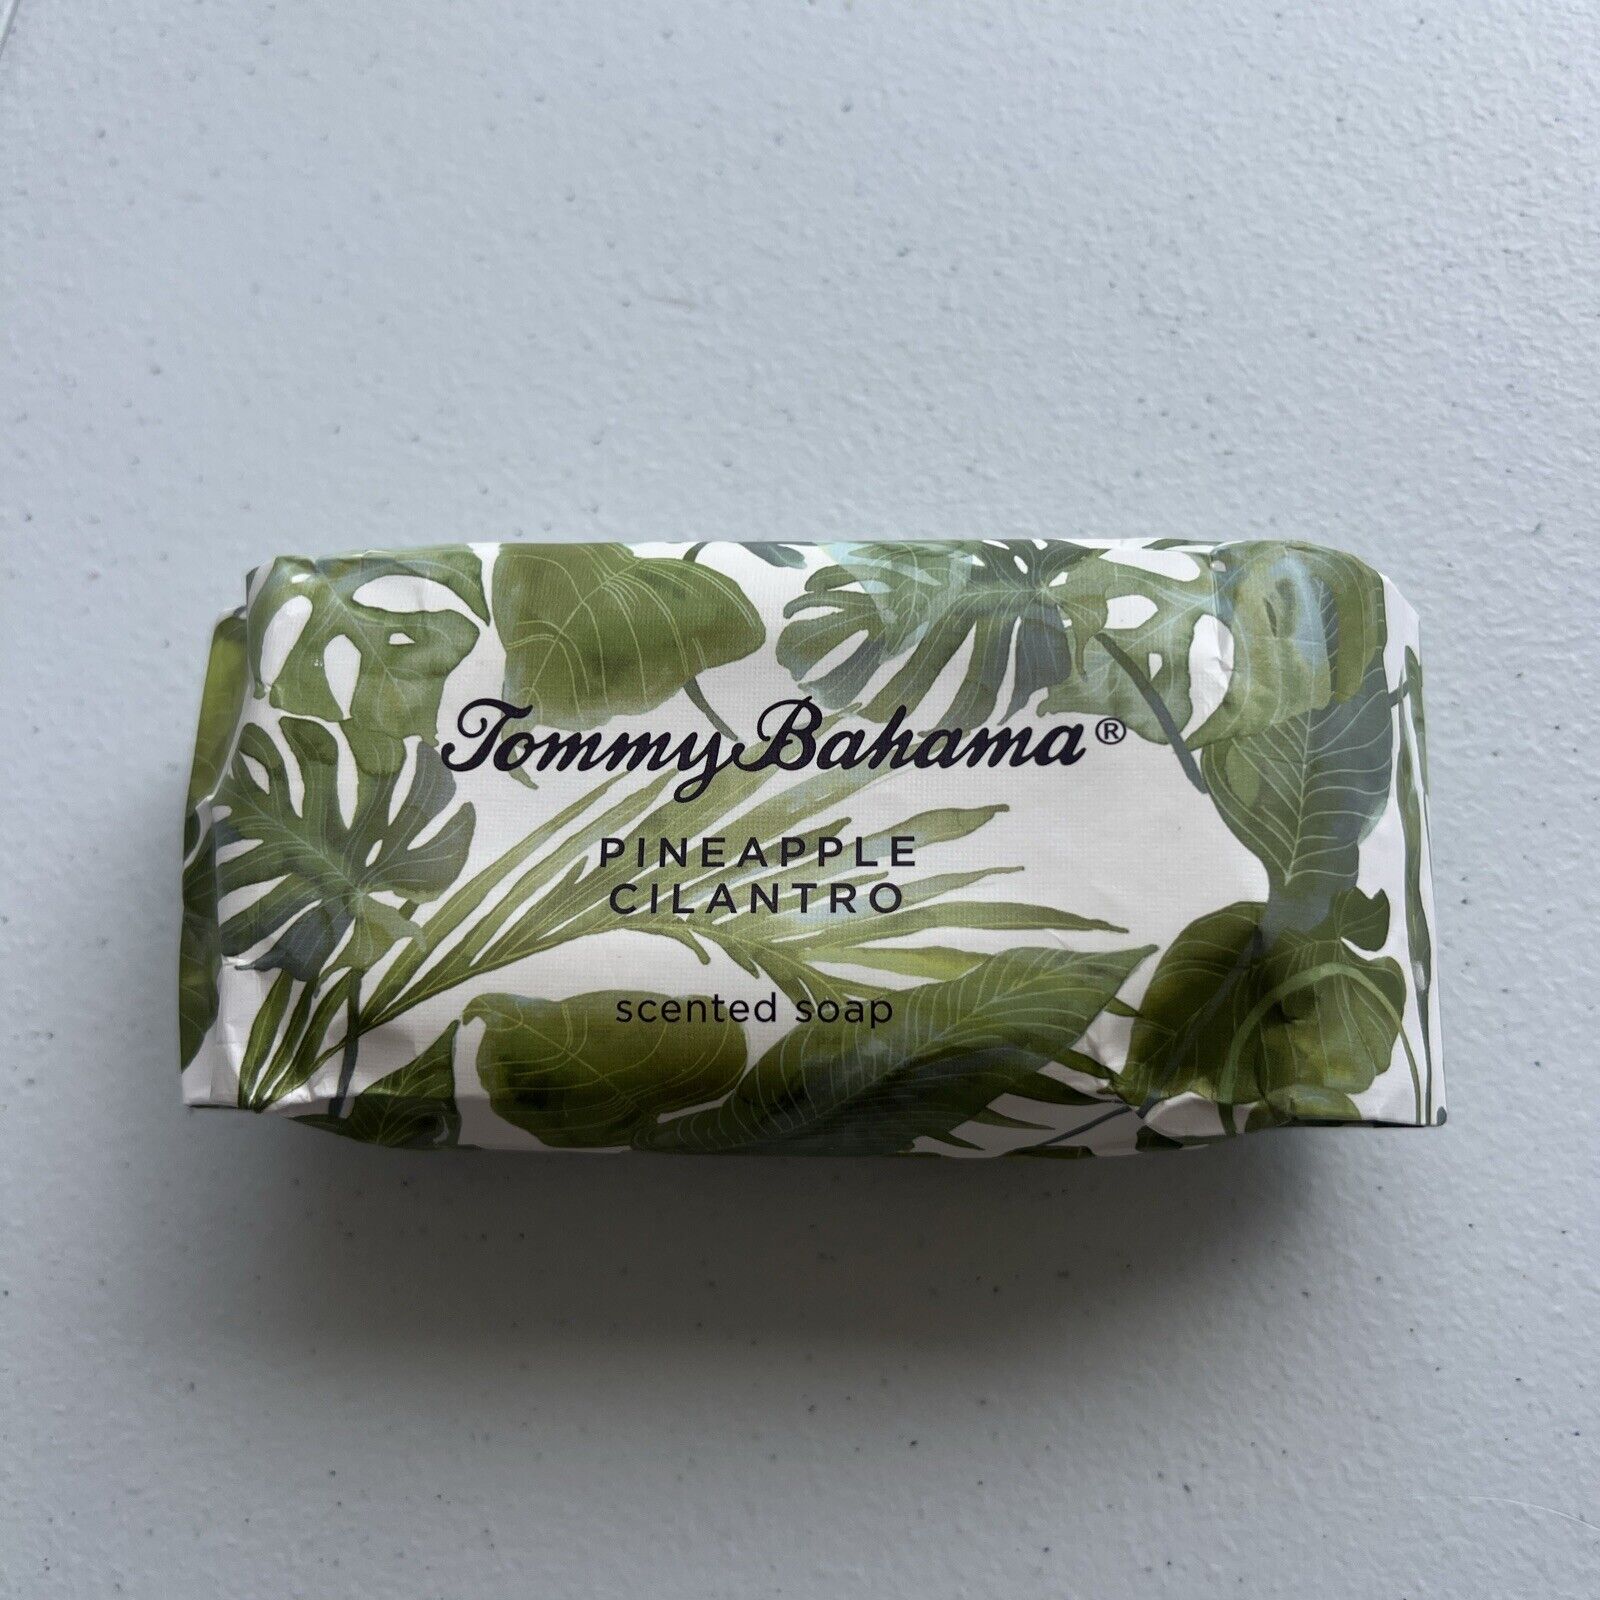 Tommy Bahama Pineapple Cilantro Fragranced Scented Bar Soap 2826